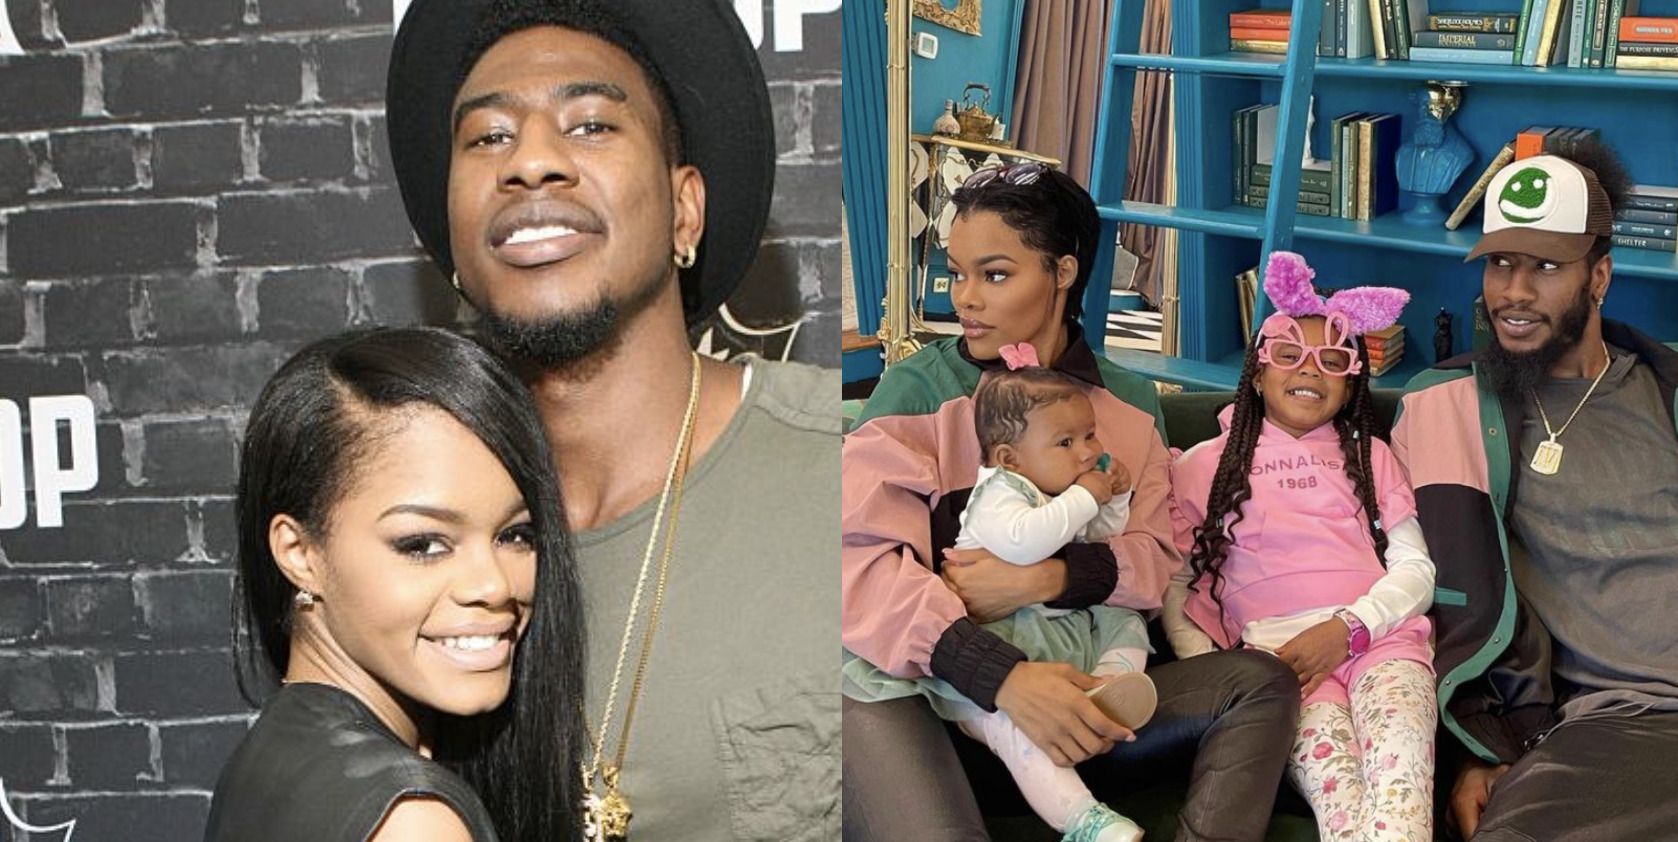 Teyana Taylor and Iman Shumpert To Star in New Reality Show - The